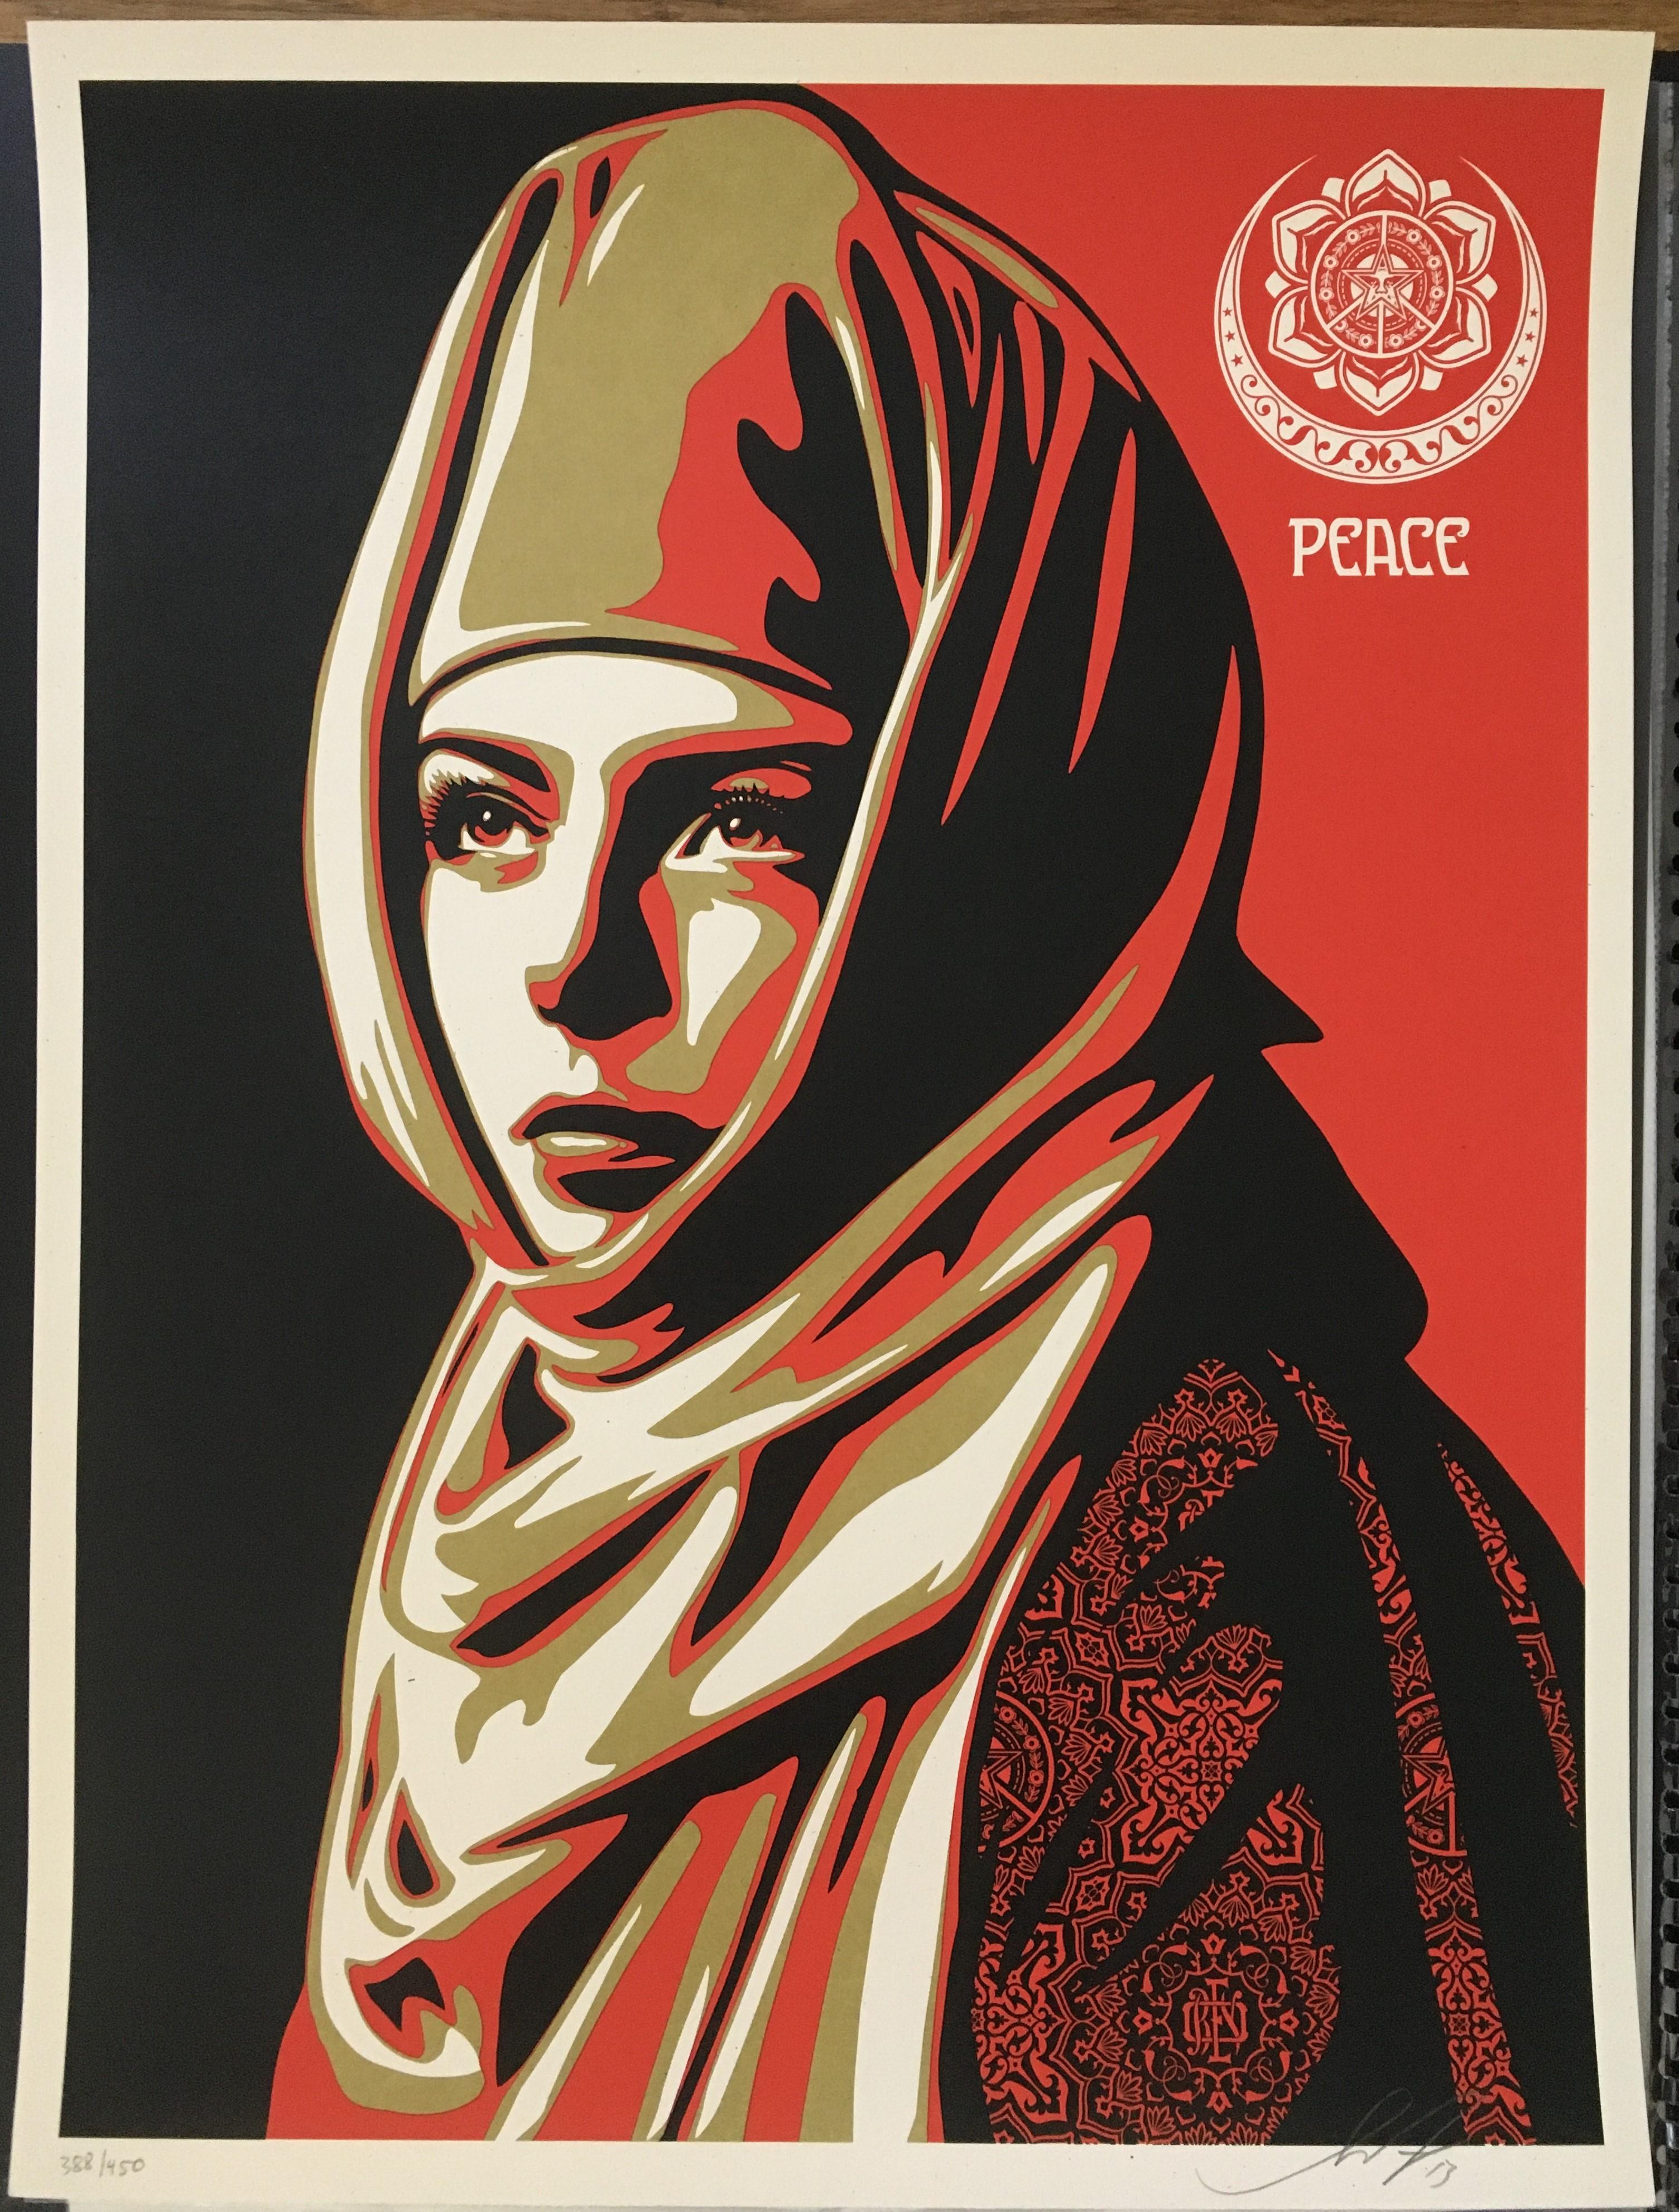 Universal Personhood, Limited Edition, 2013 - Print by Shepard Fairey